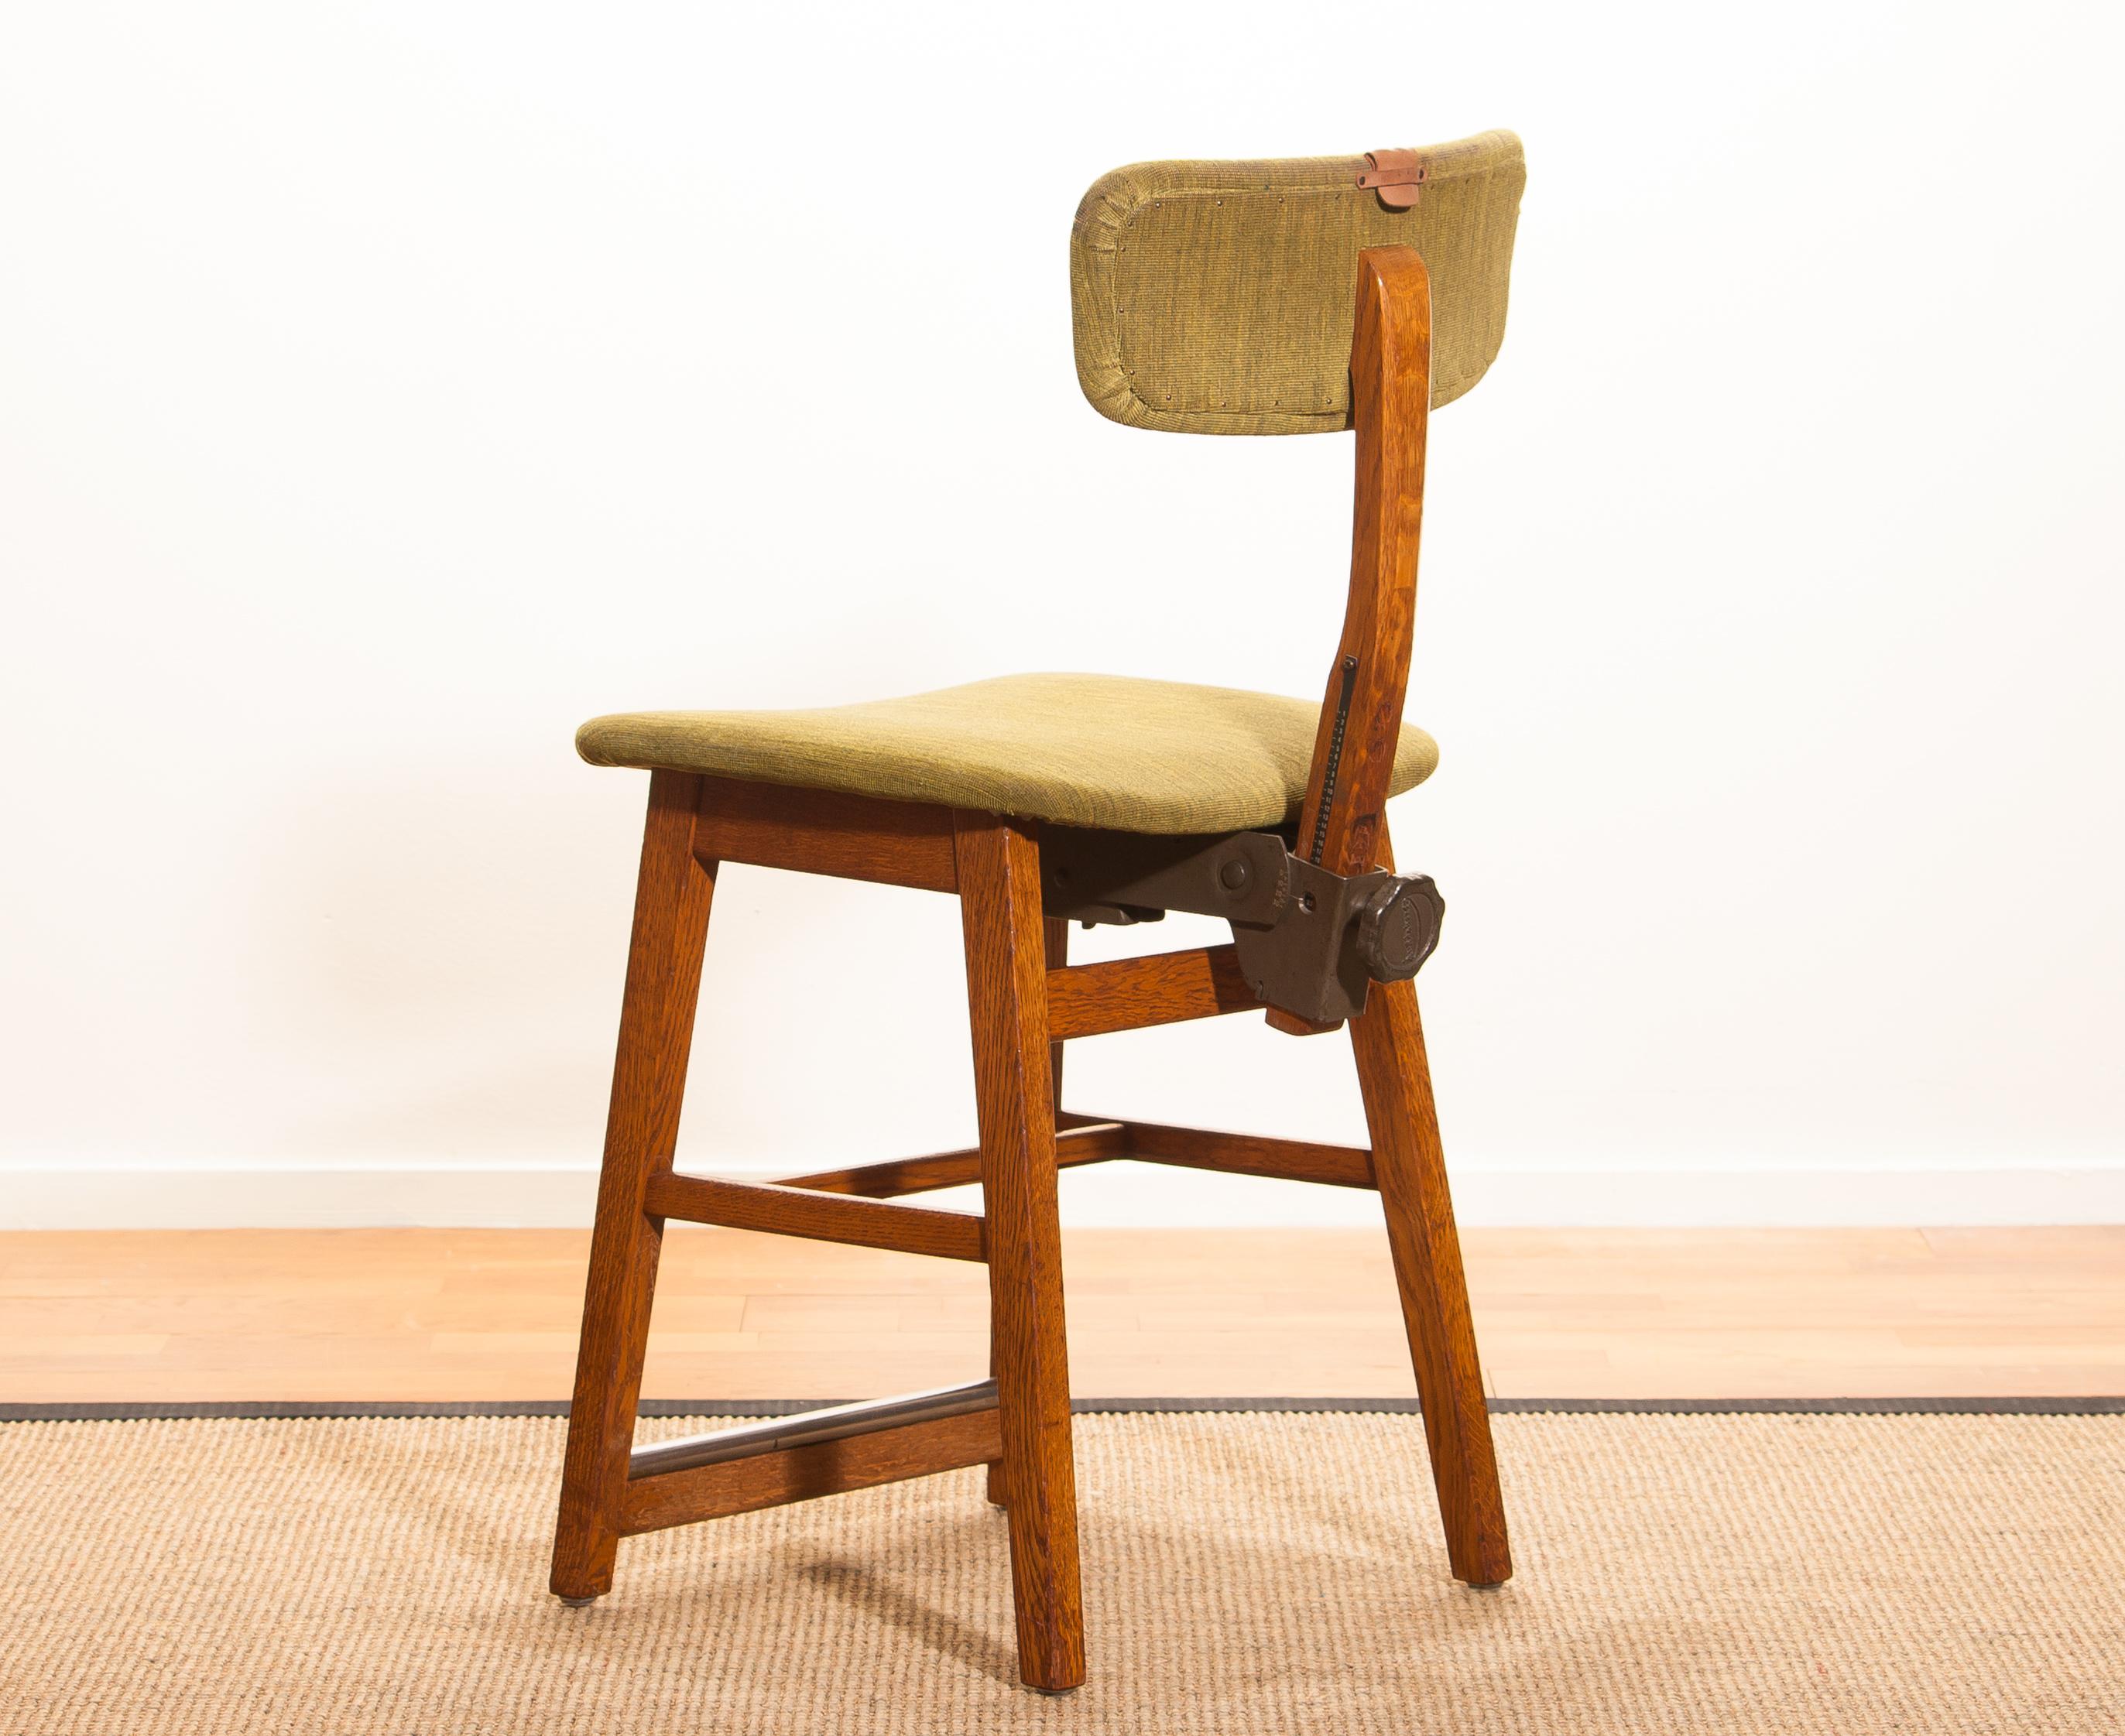 Industrial 1940s, Oak and Wool Desk Chair by Âtvidabergs, Sweden